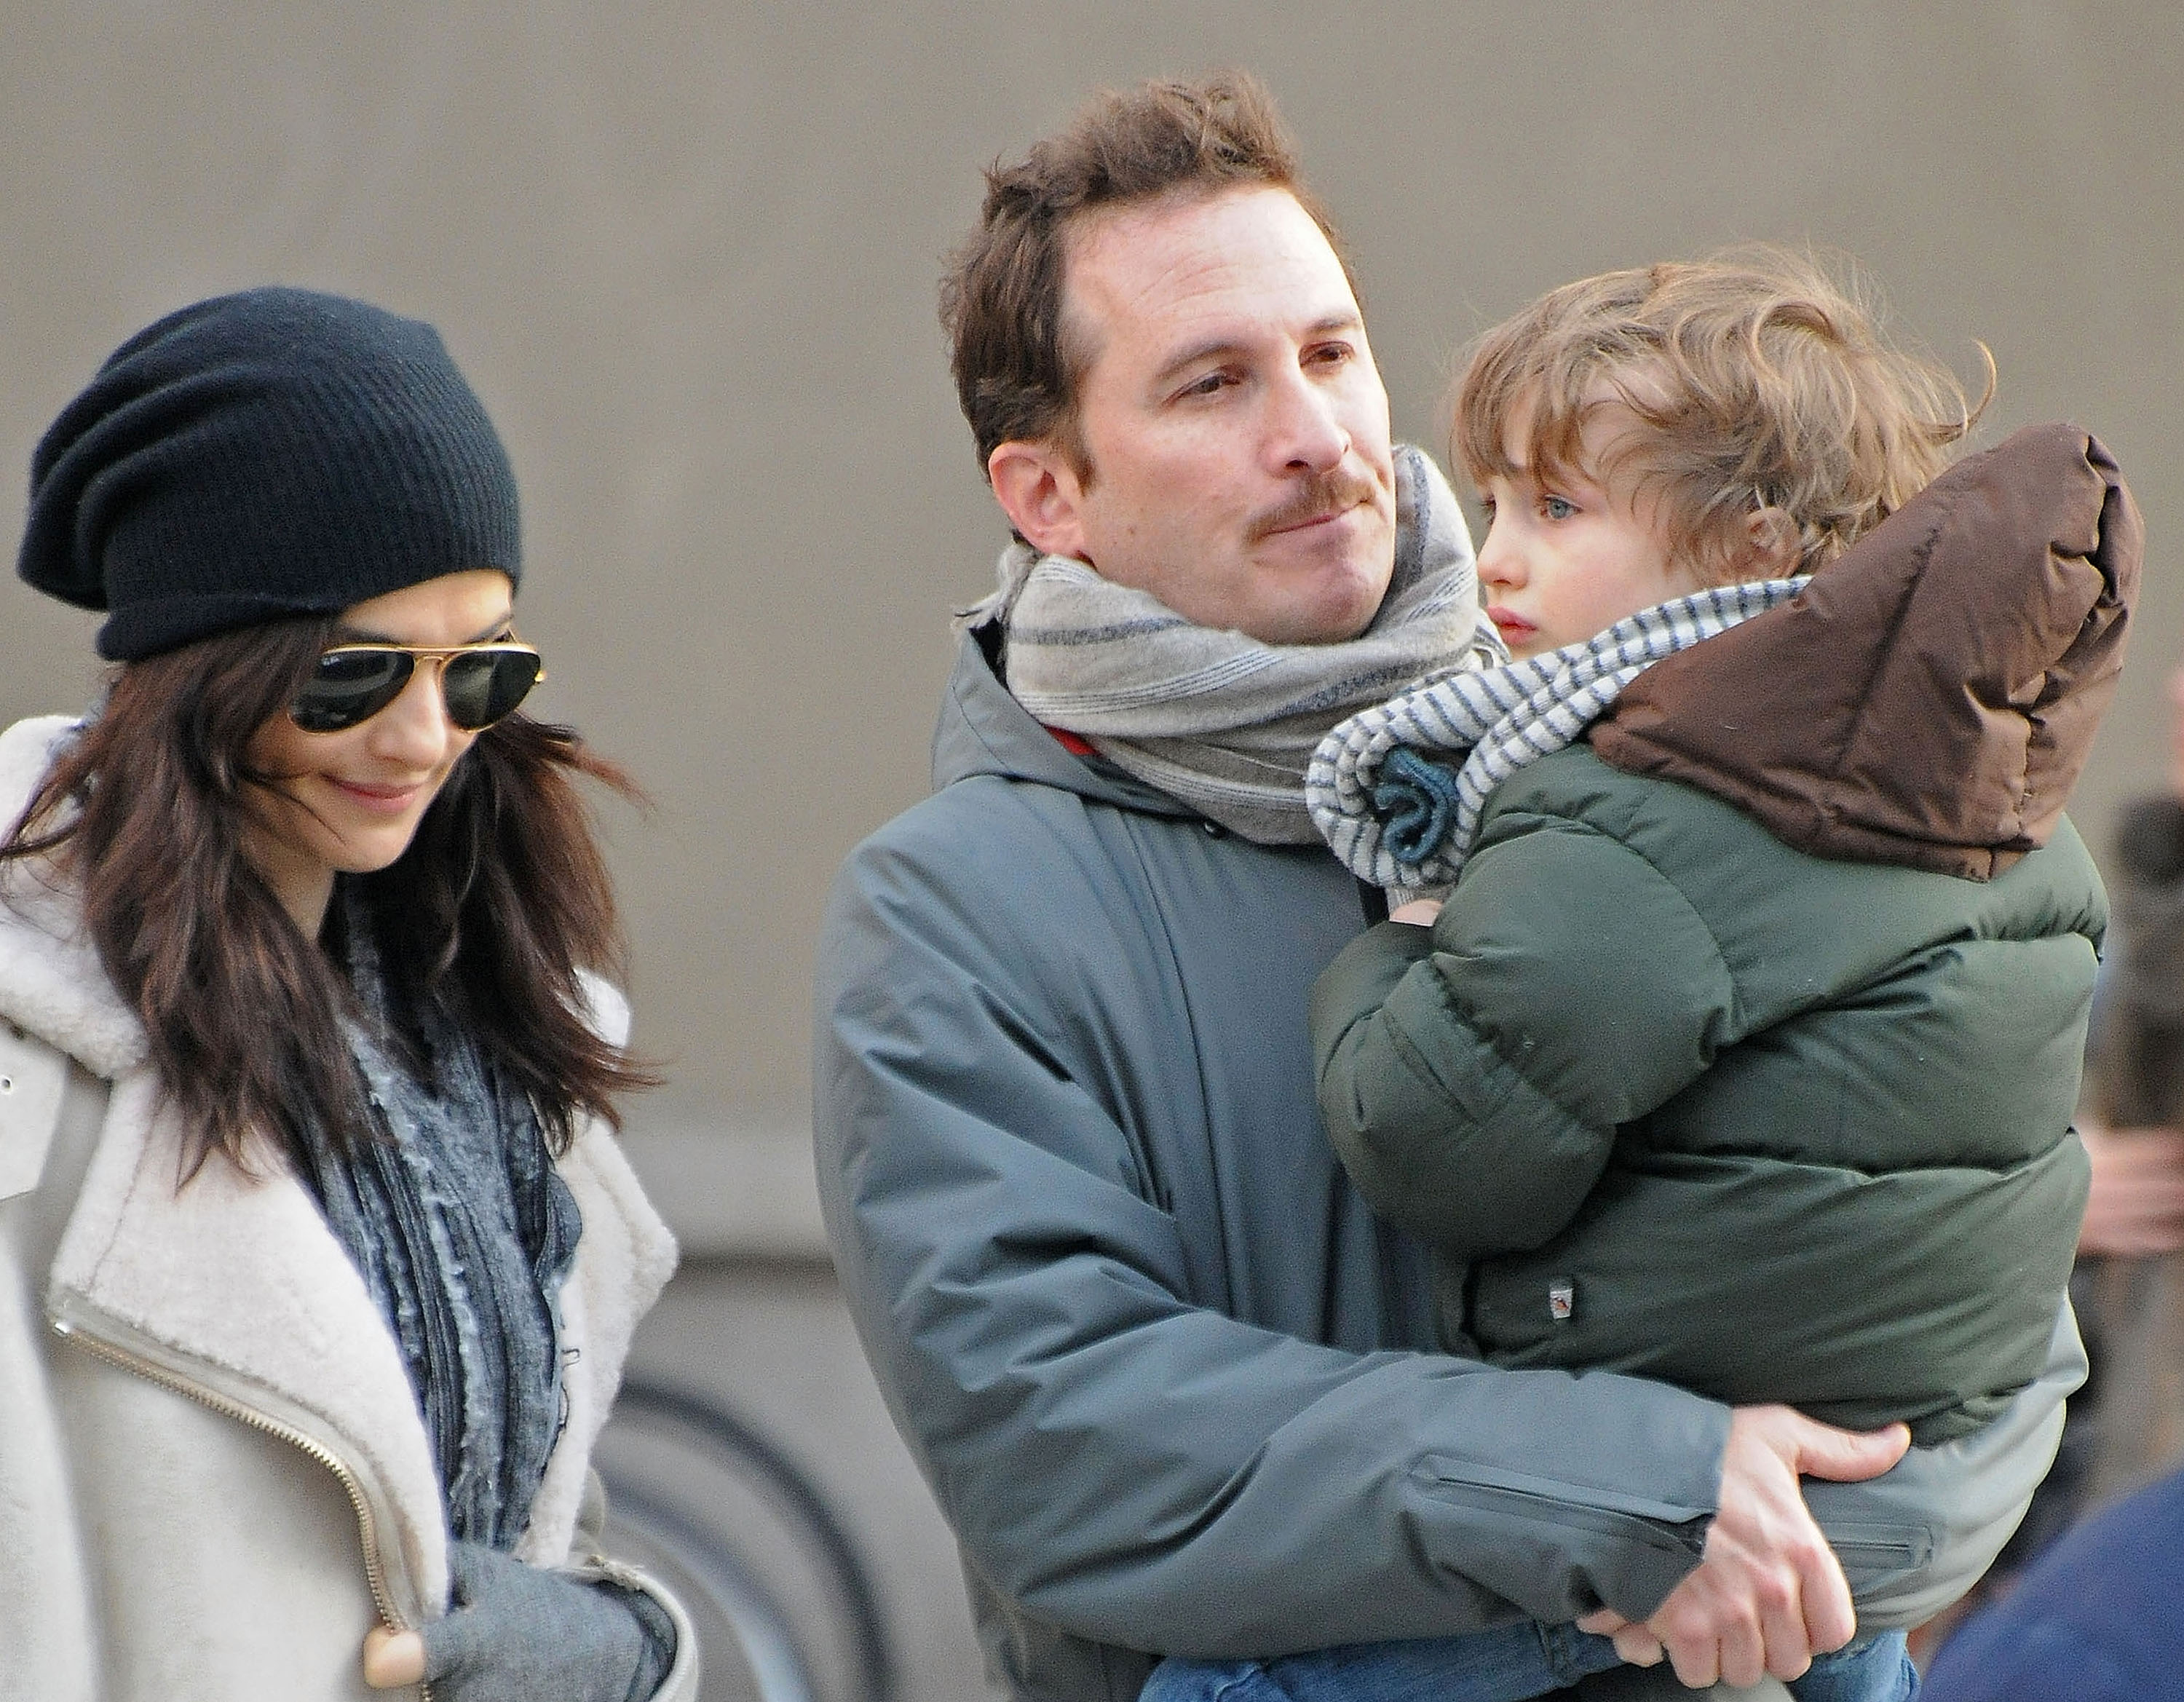 Rachel Weisz, Darren Aronofsky, and Henry Aronofsky spotted in New York City on January 5, 2011, in New York City. | Source: Getty Images